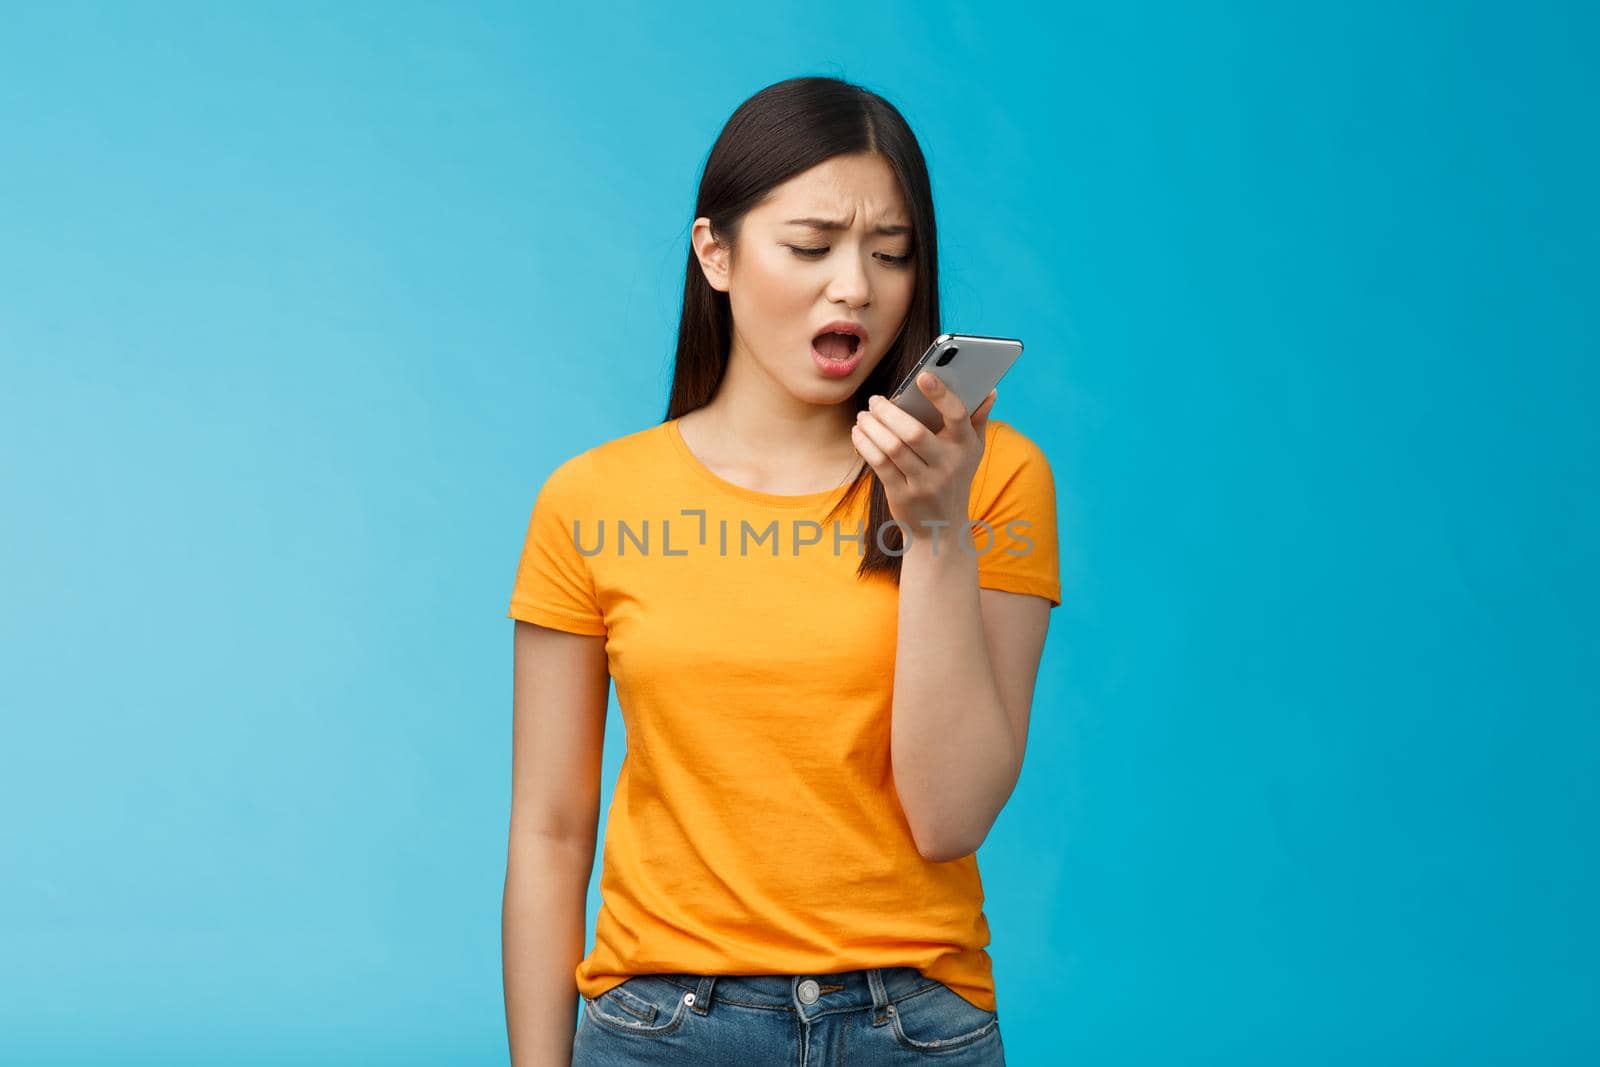 Upset whining displeased moody girlfriend complaining talk into smartphone hold phone near mouth upset, frowning bothered bad connection, record voice message, blue background. Copy space